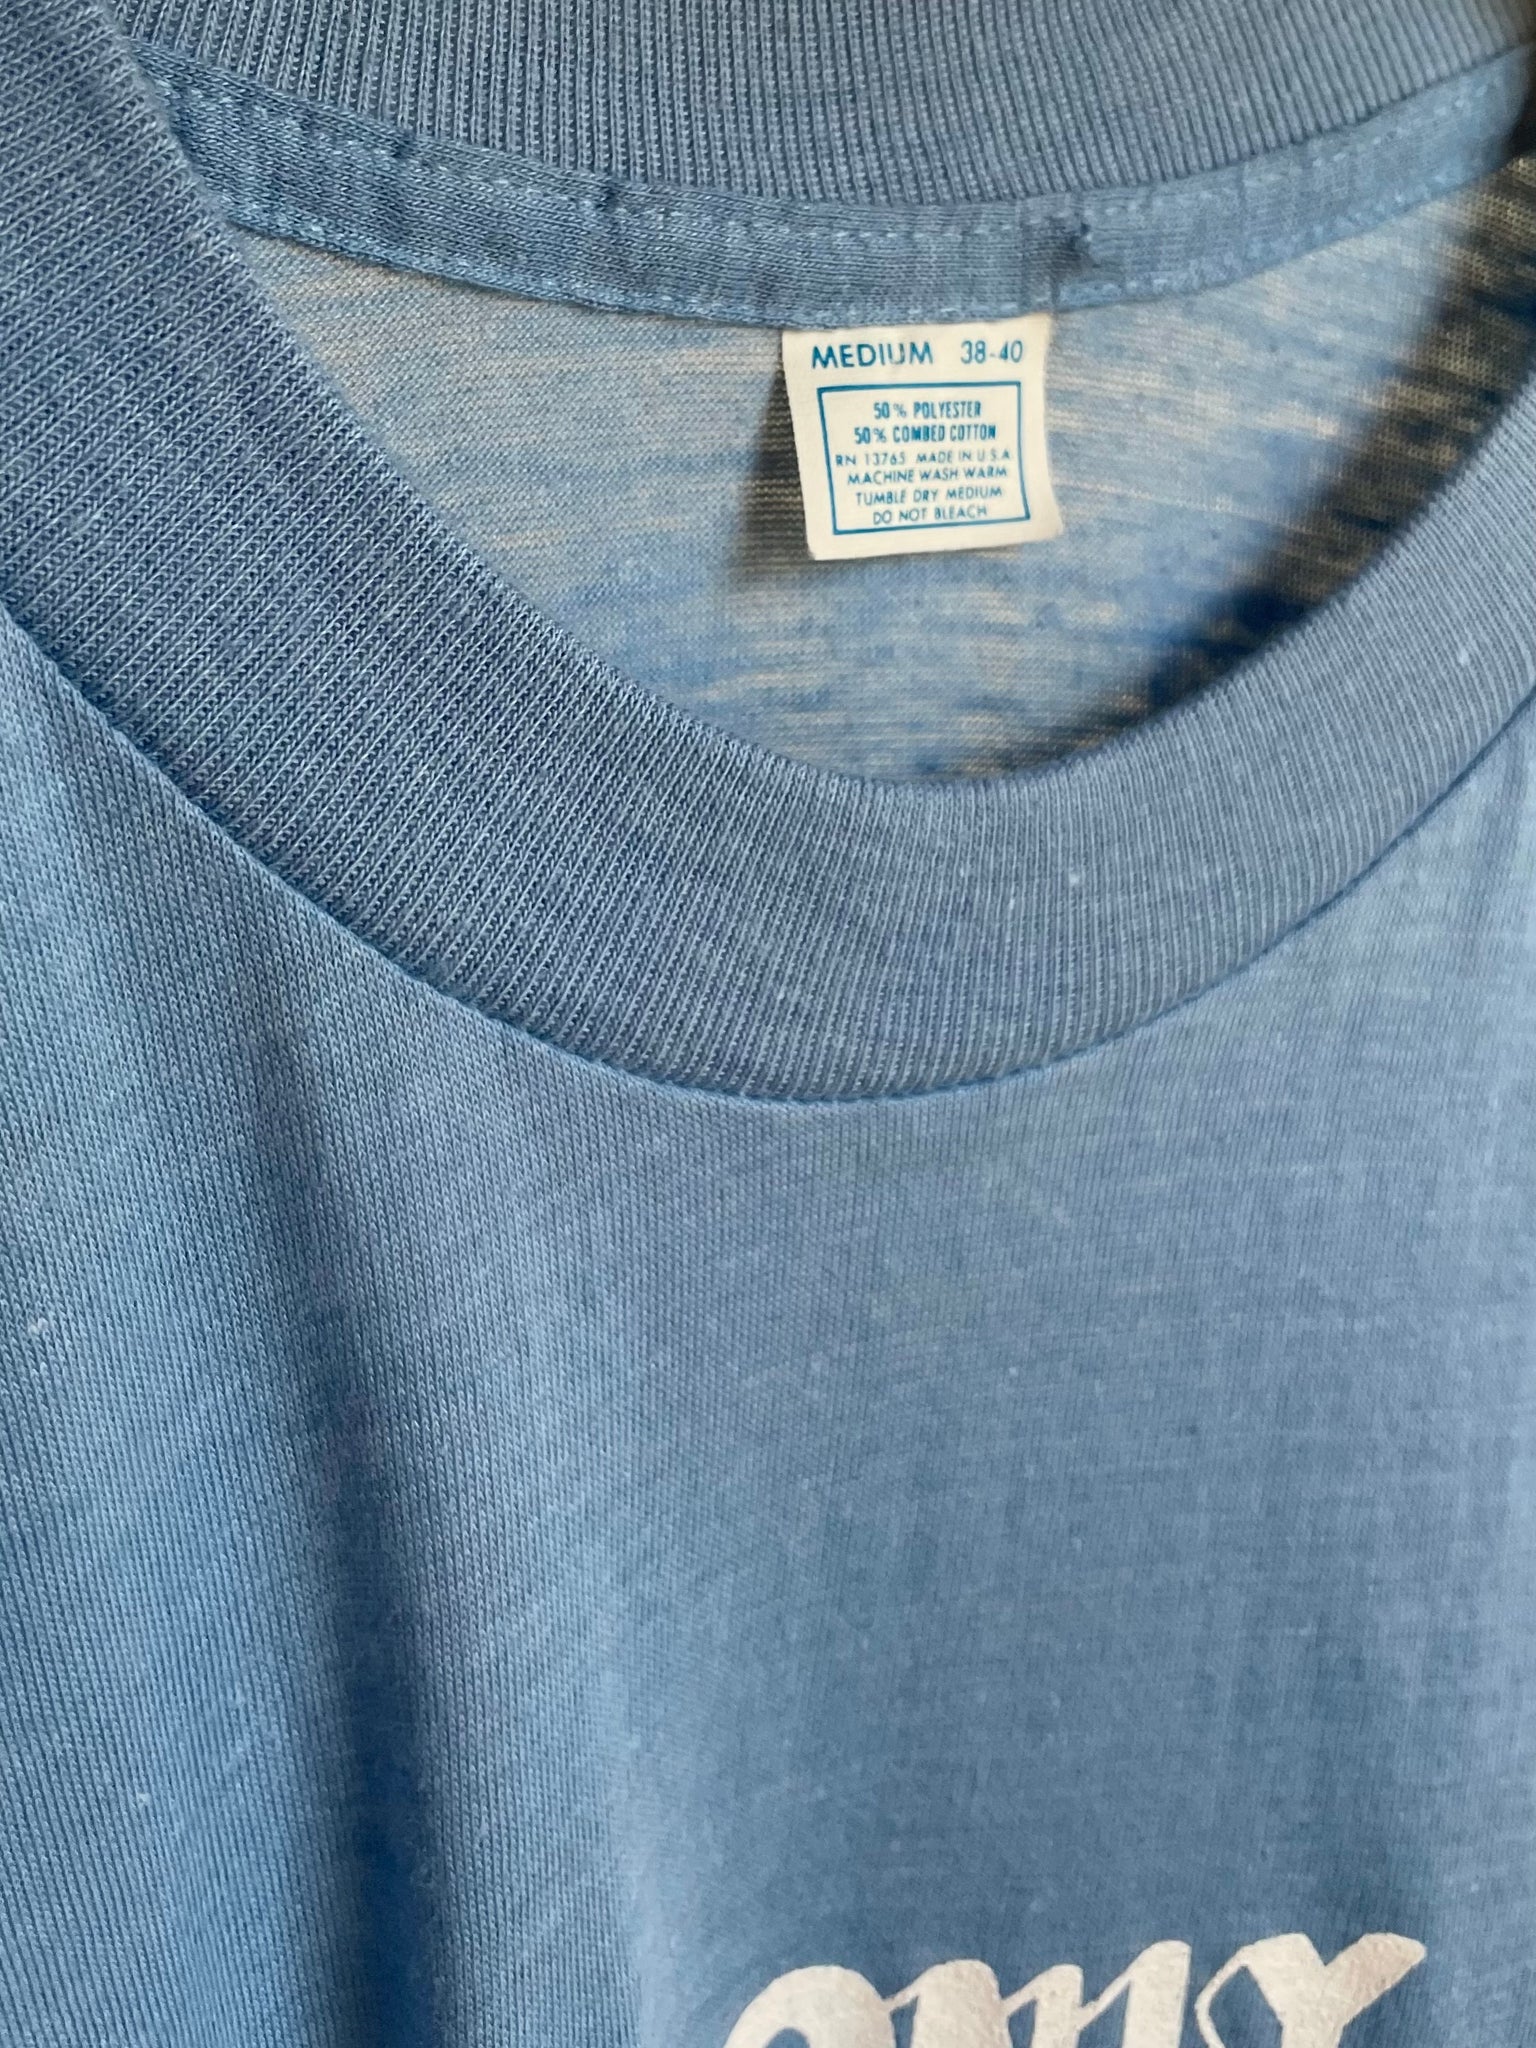 1970s I Only Sleep With The Best Novelty Light Blue Tee T Shirt